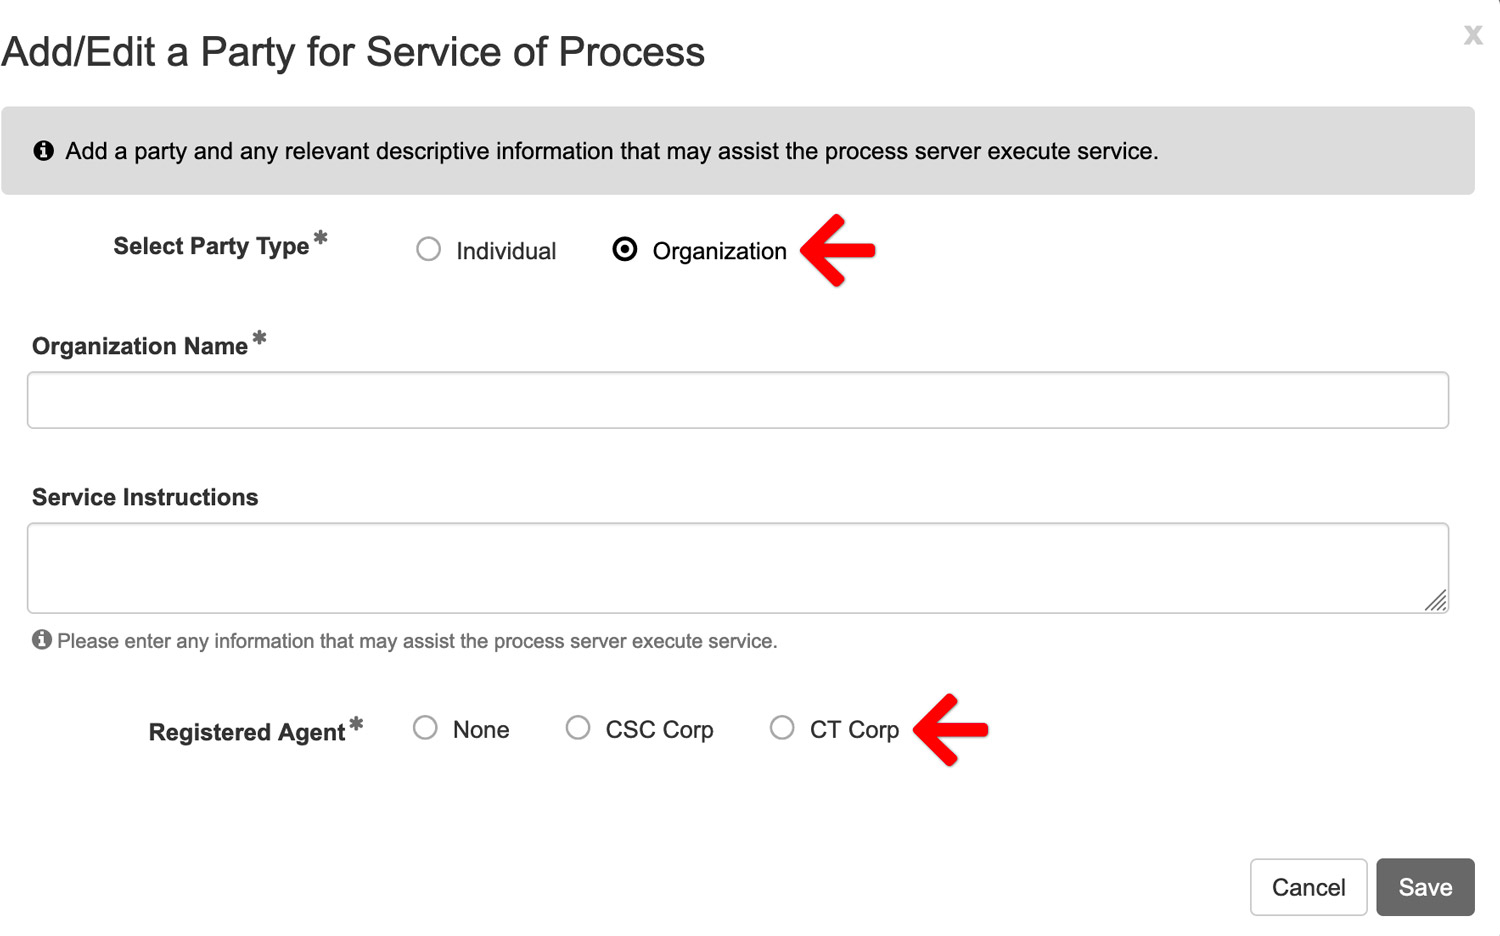 Add a Business or Organization for Service of Process